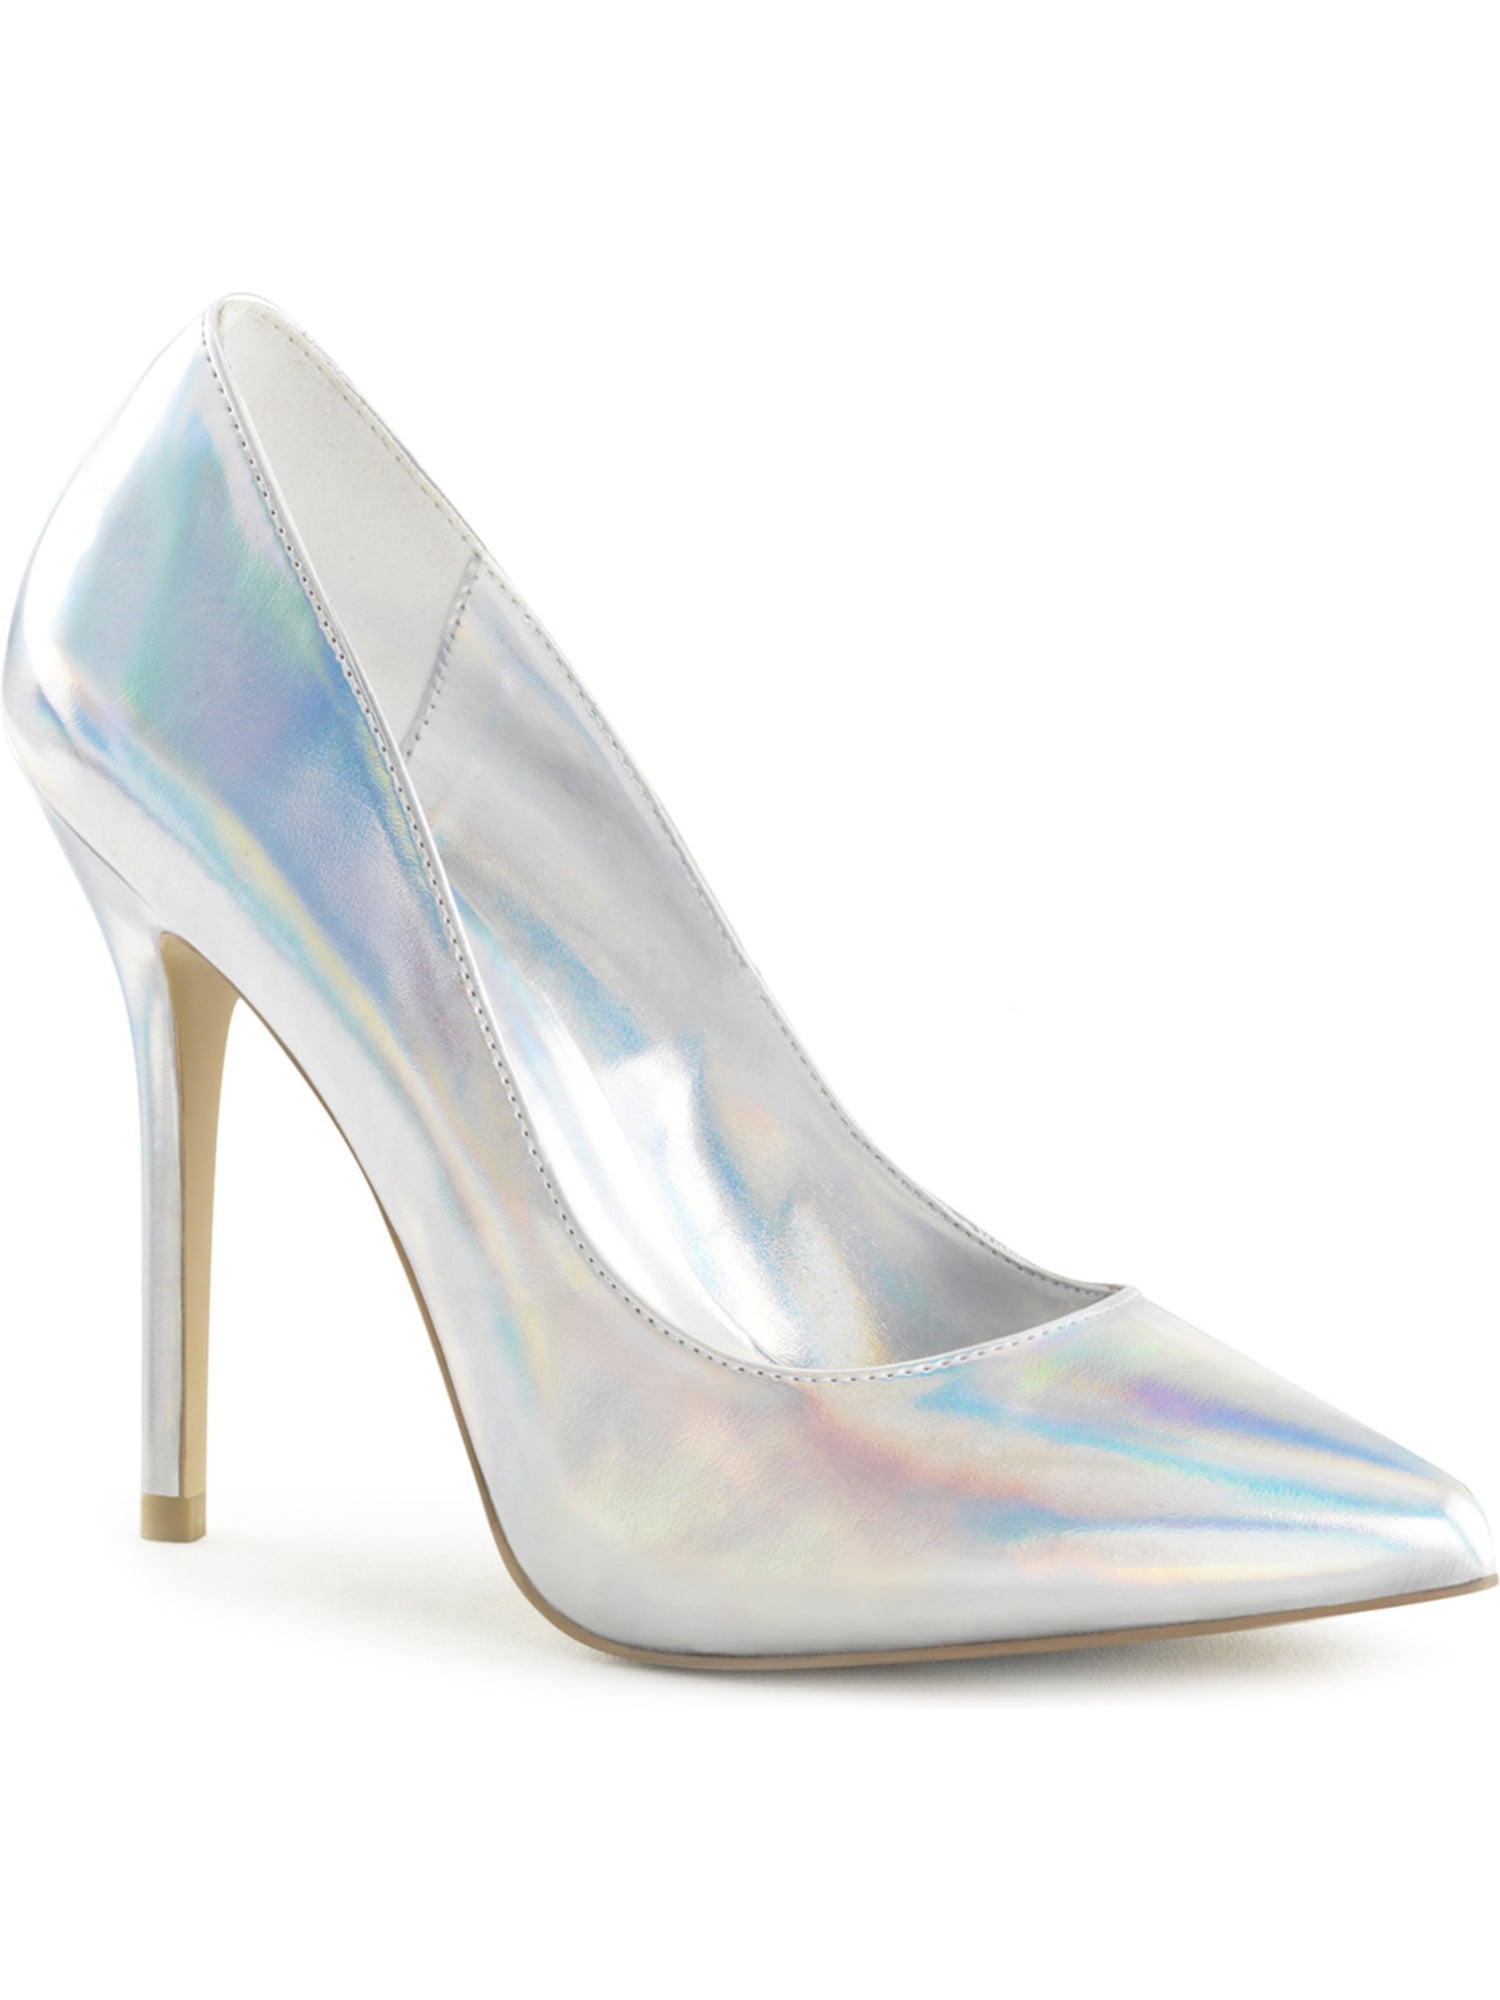 silver holographic sneakers